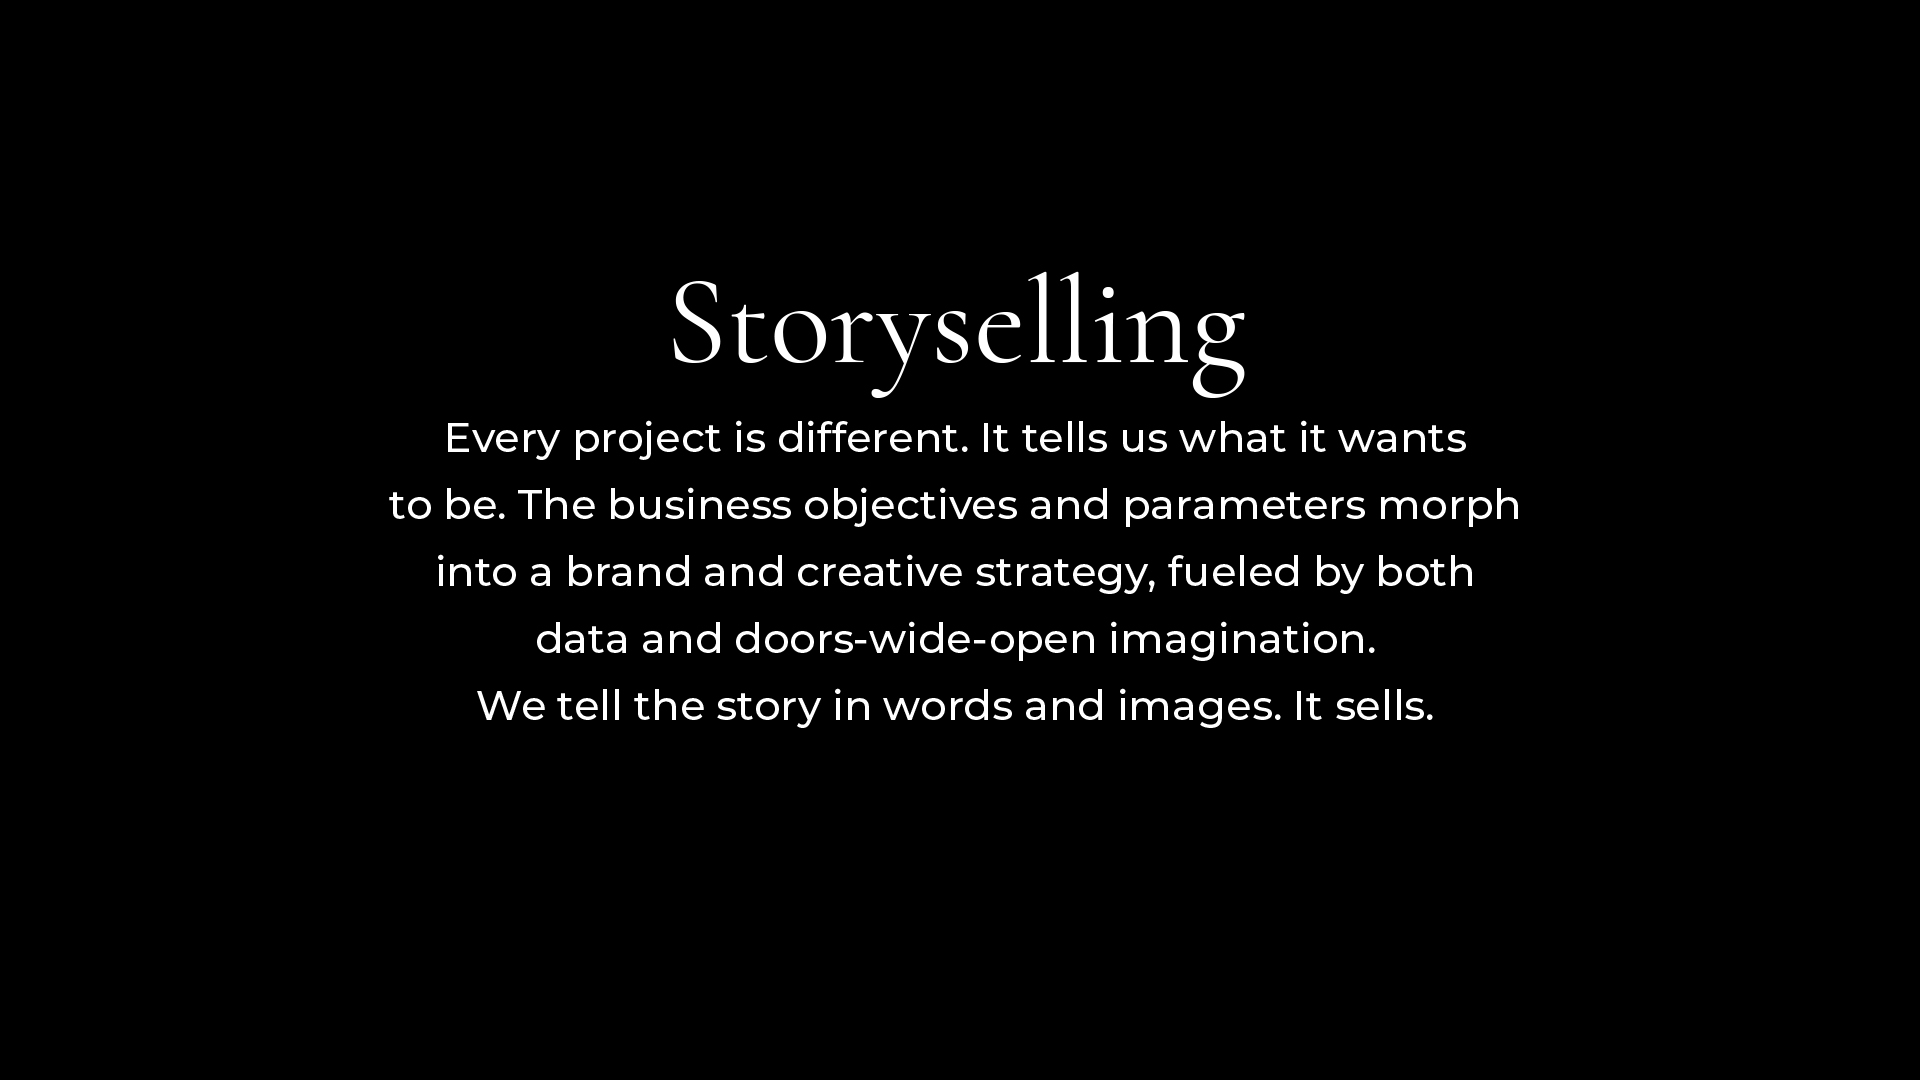 about adams design storyselling white type on black